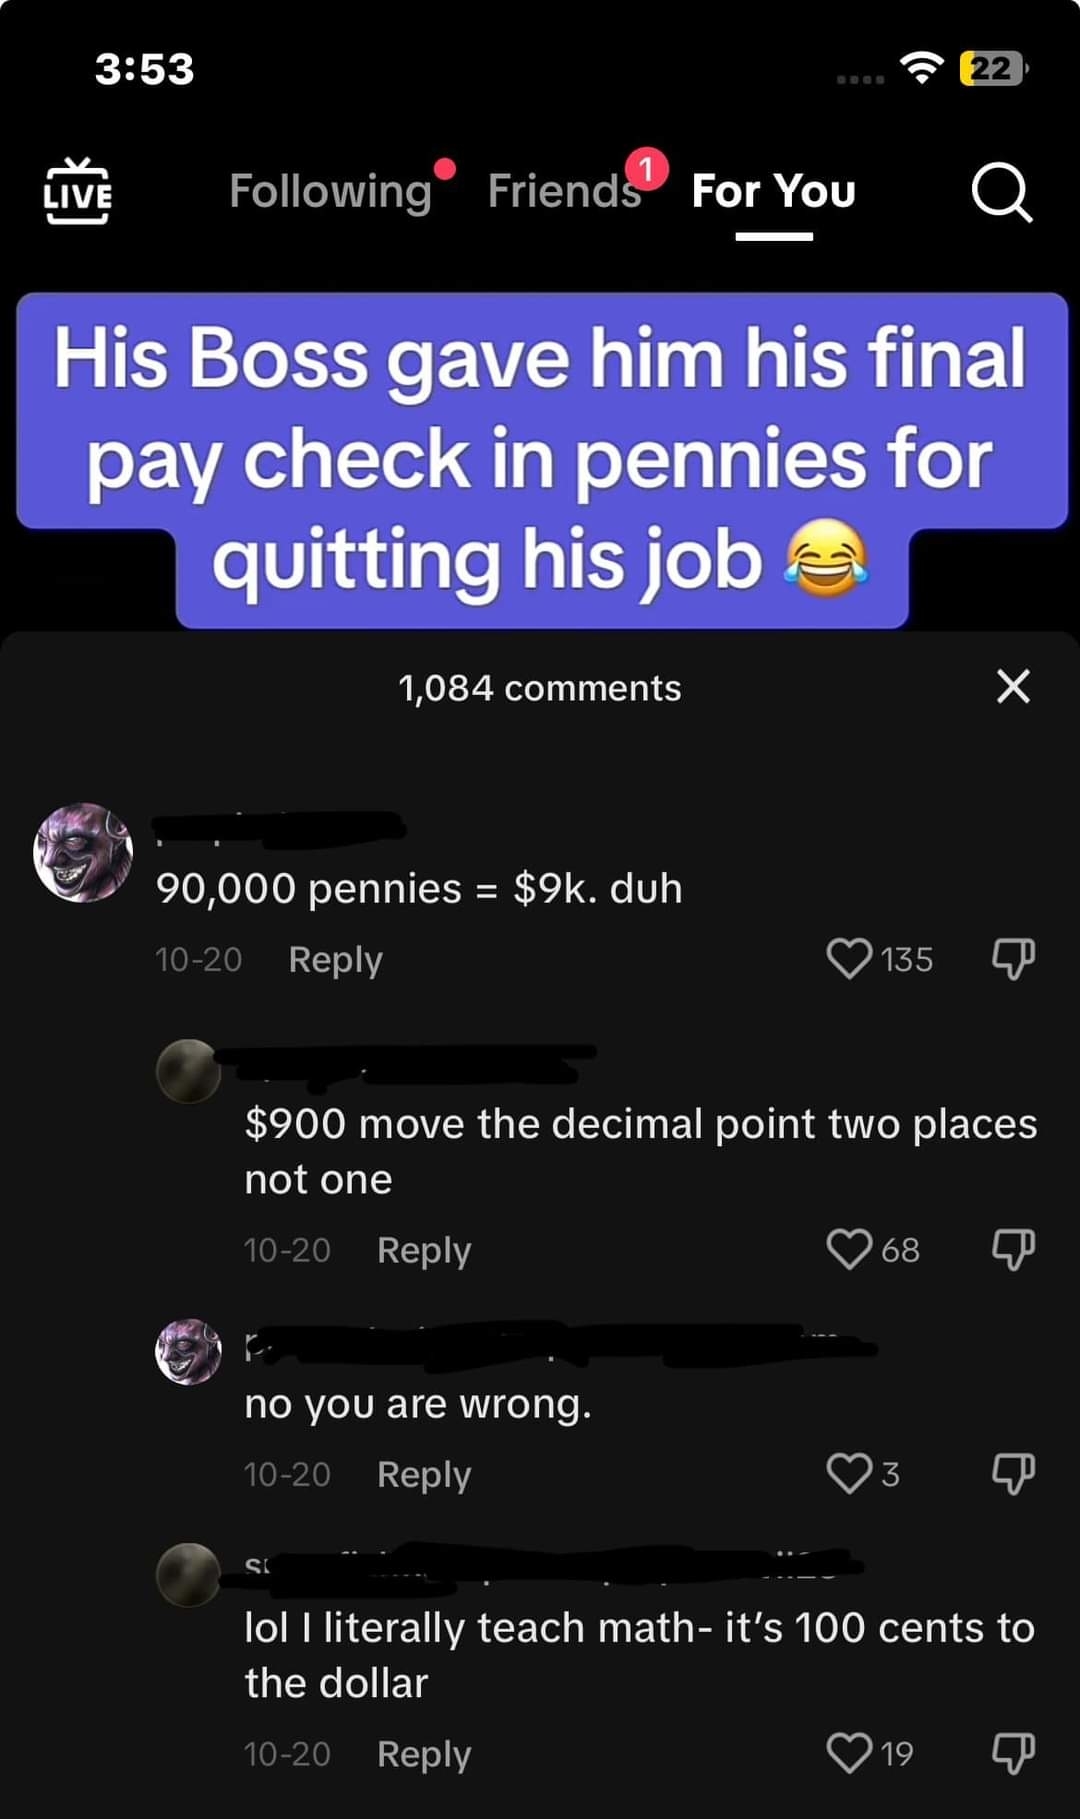 Boss gave employee his final paycheck in pennies for quitting, and someone says &quot;90,000 pennies=$9K, duh,&quot; and someone says &quot;$900; move the decimal point two places, not one,&quot; and they say &quot;No, you are wrong&quot;